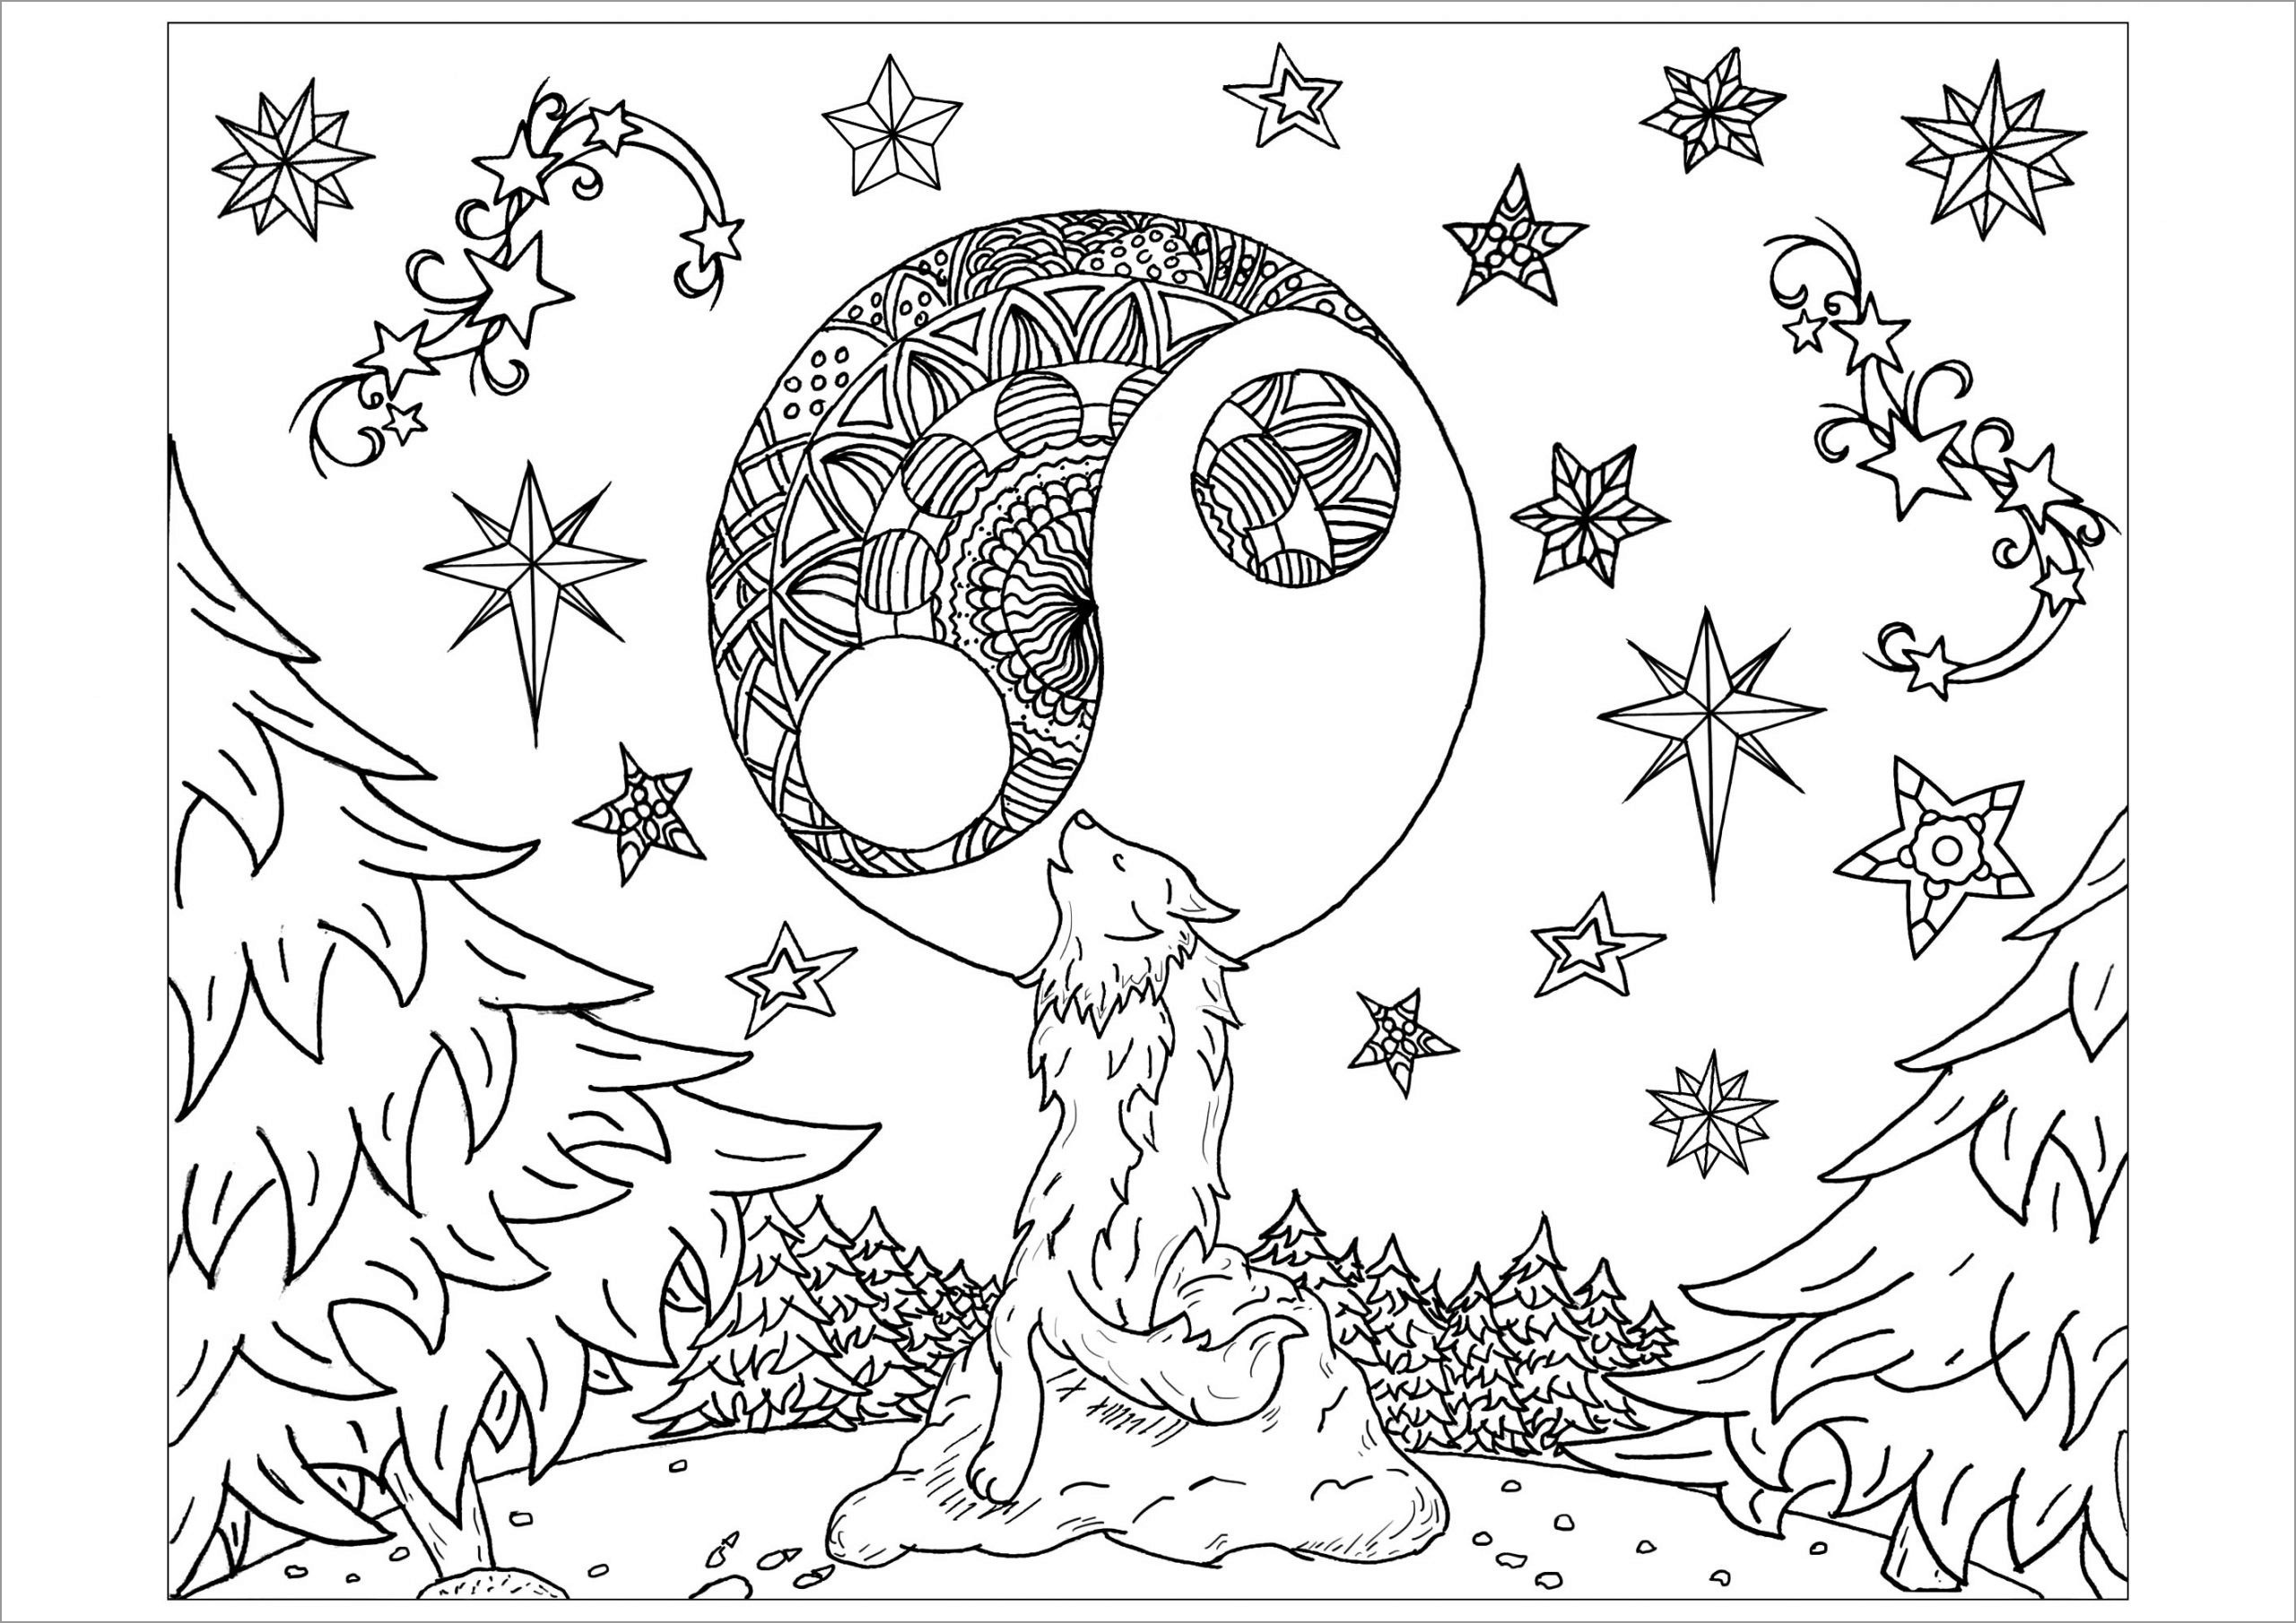 wolf mandala night and stars coloring page for adult coloringbay